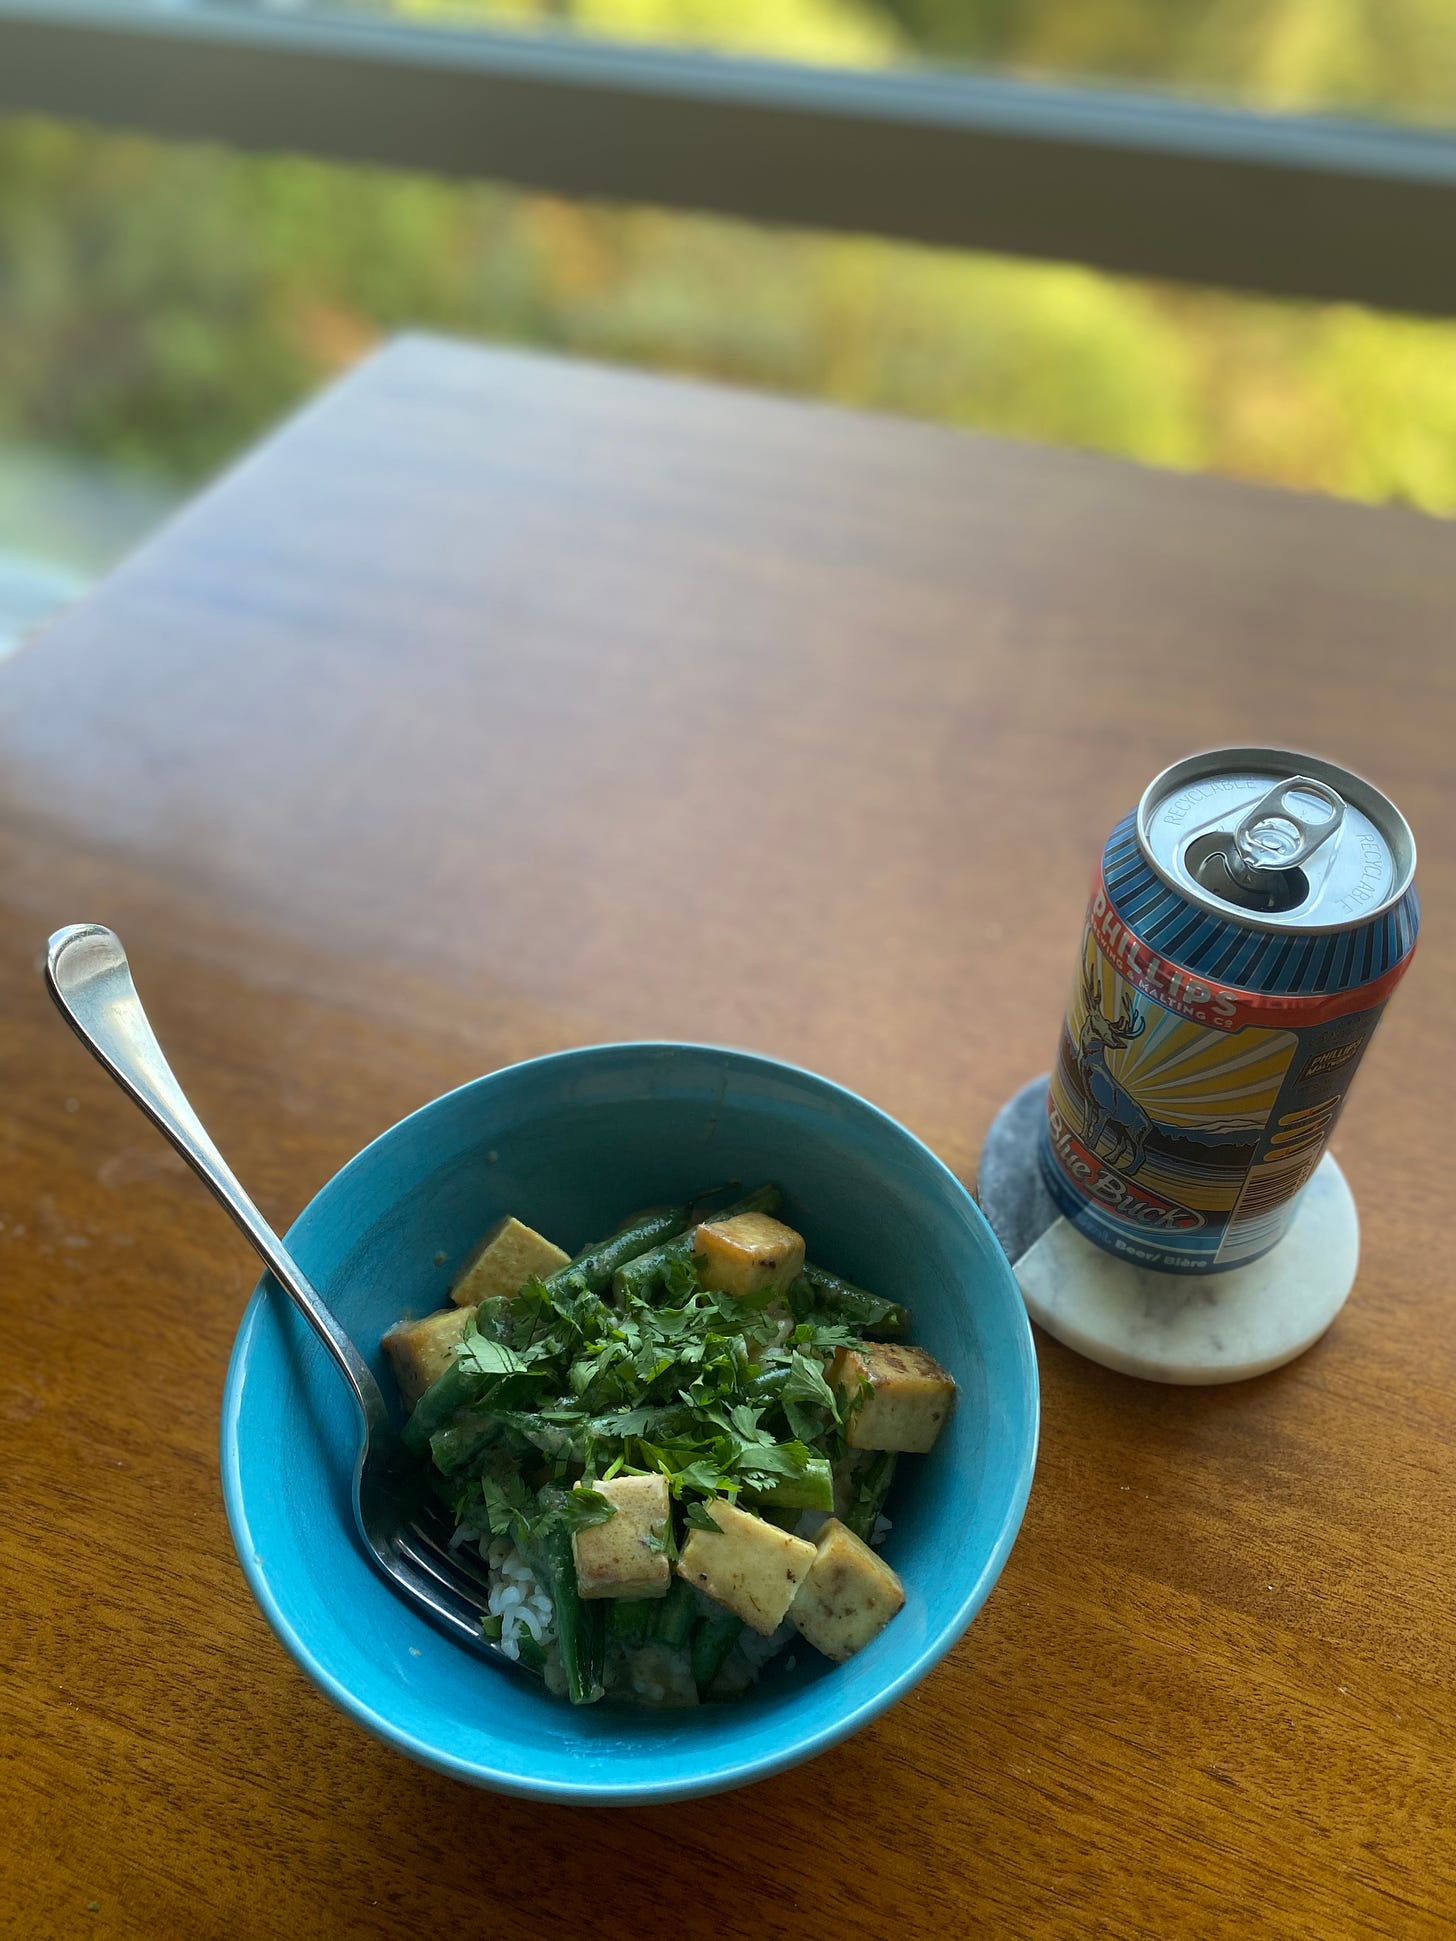 A blue bowl with the curry described above, over jasmine rice. Crispy cubes of tofu and pieces of green beans are visible beneath plenty of chopped cilantro. On a coaster beside the bowl is a can of Phillips Blue Buck pale ale